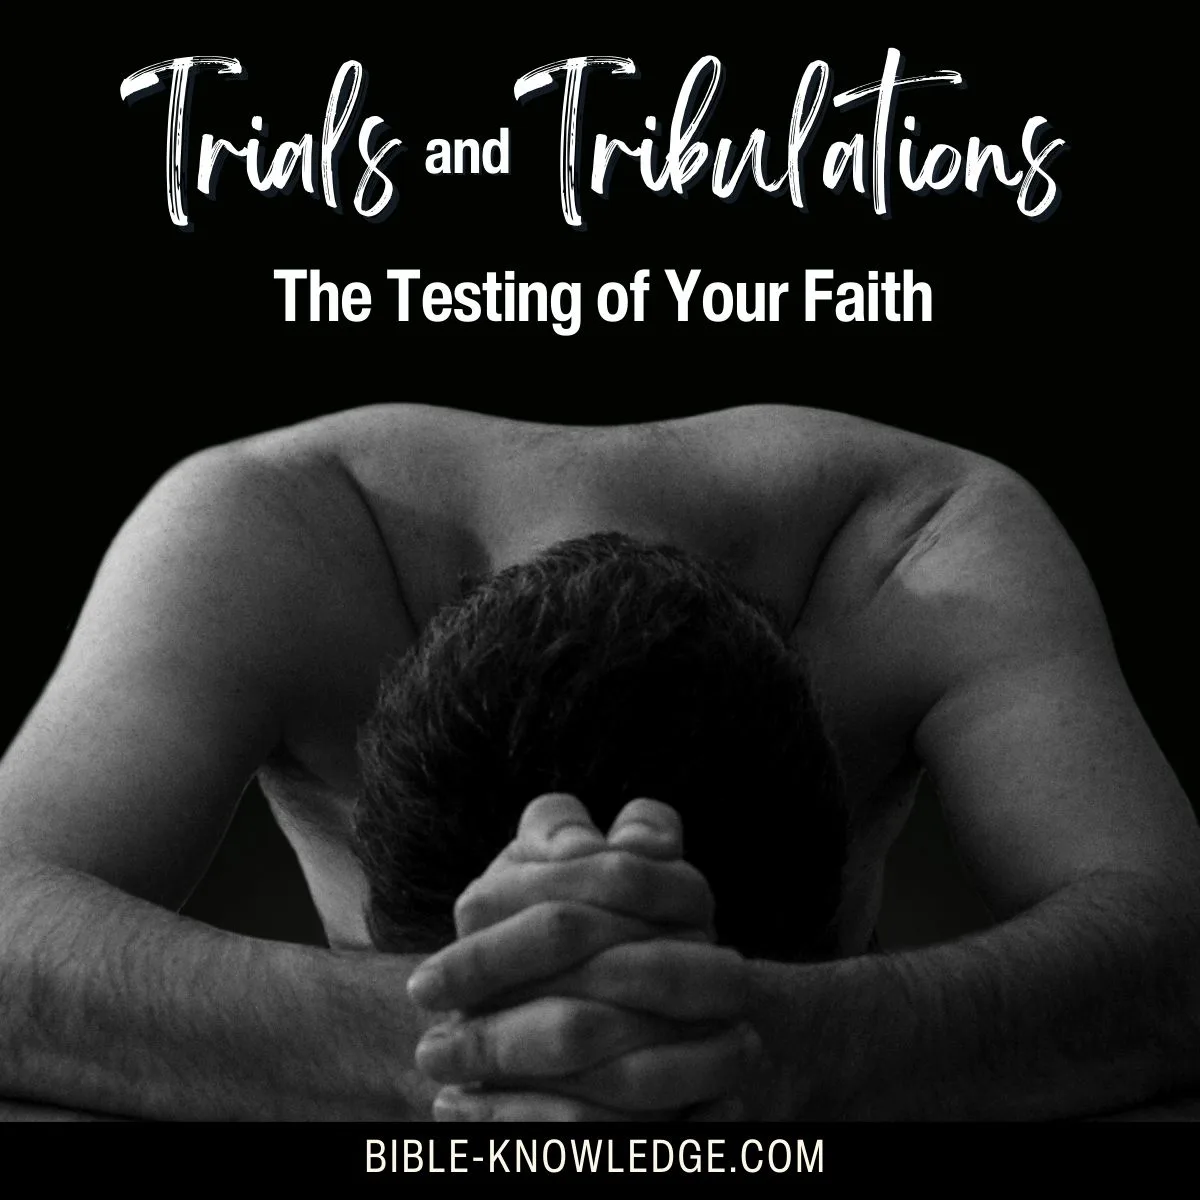 Trials and Tribulations - The Testing of Your Faith